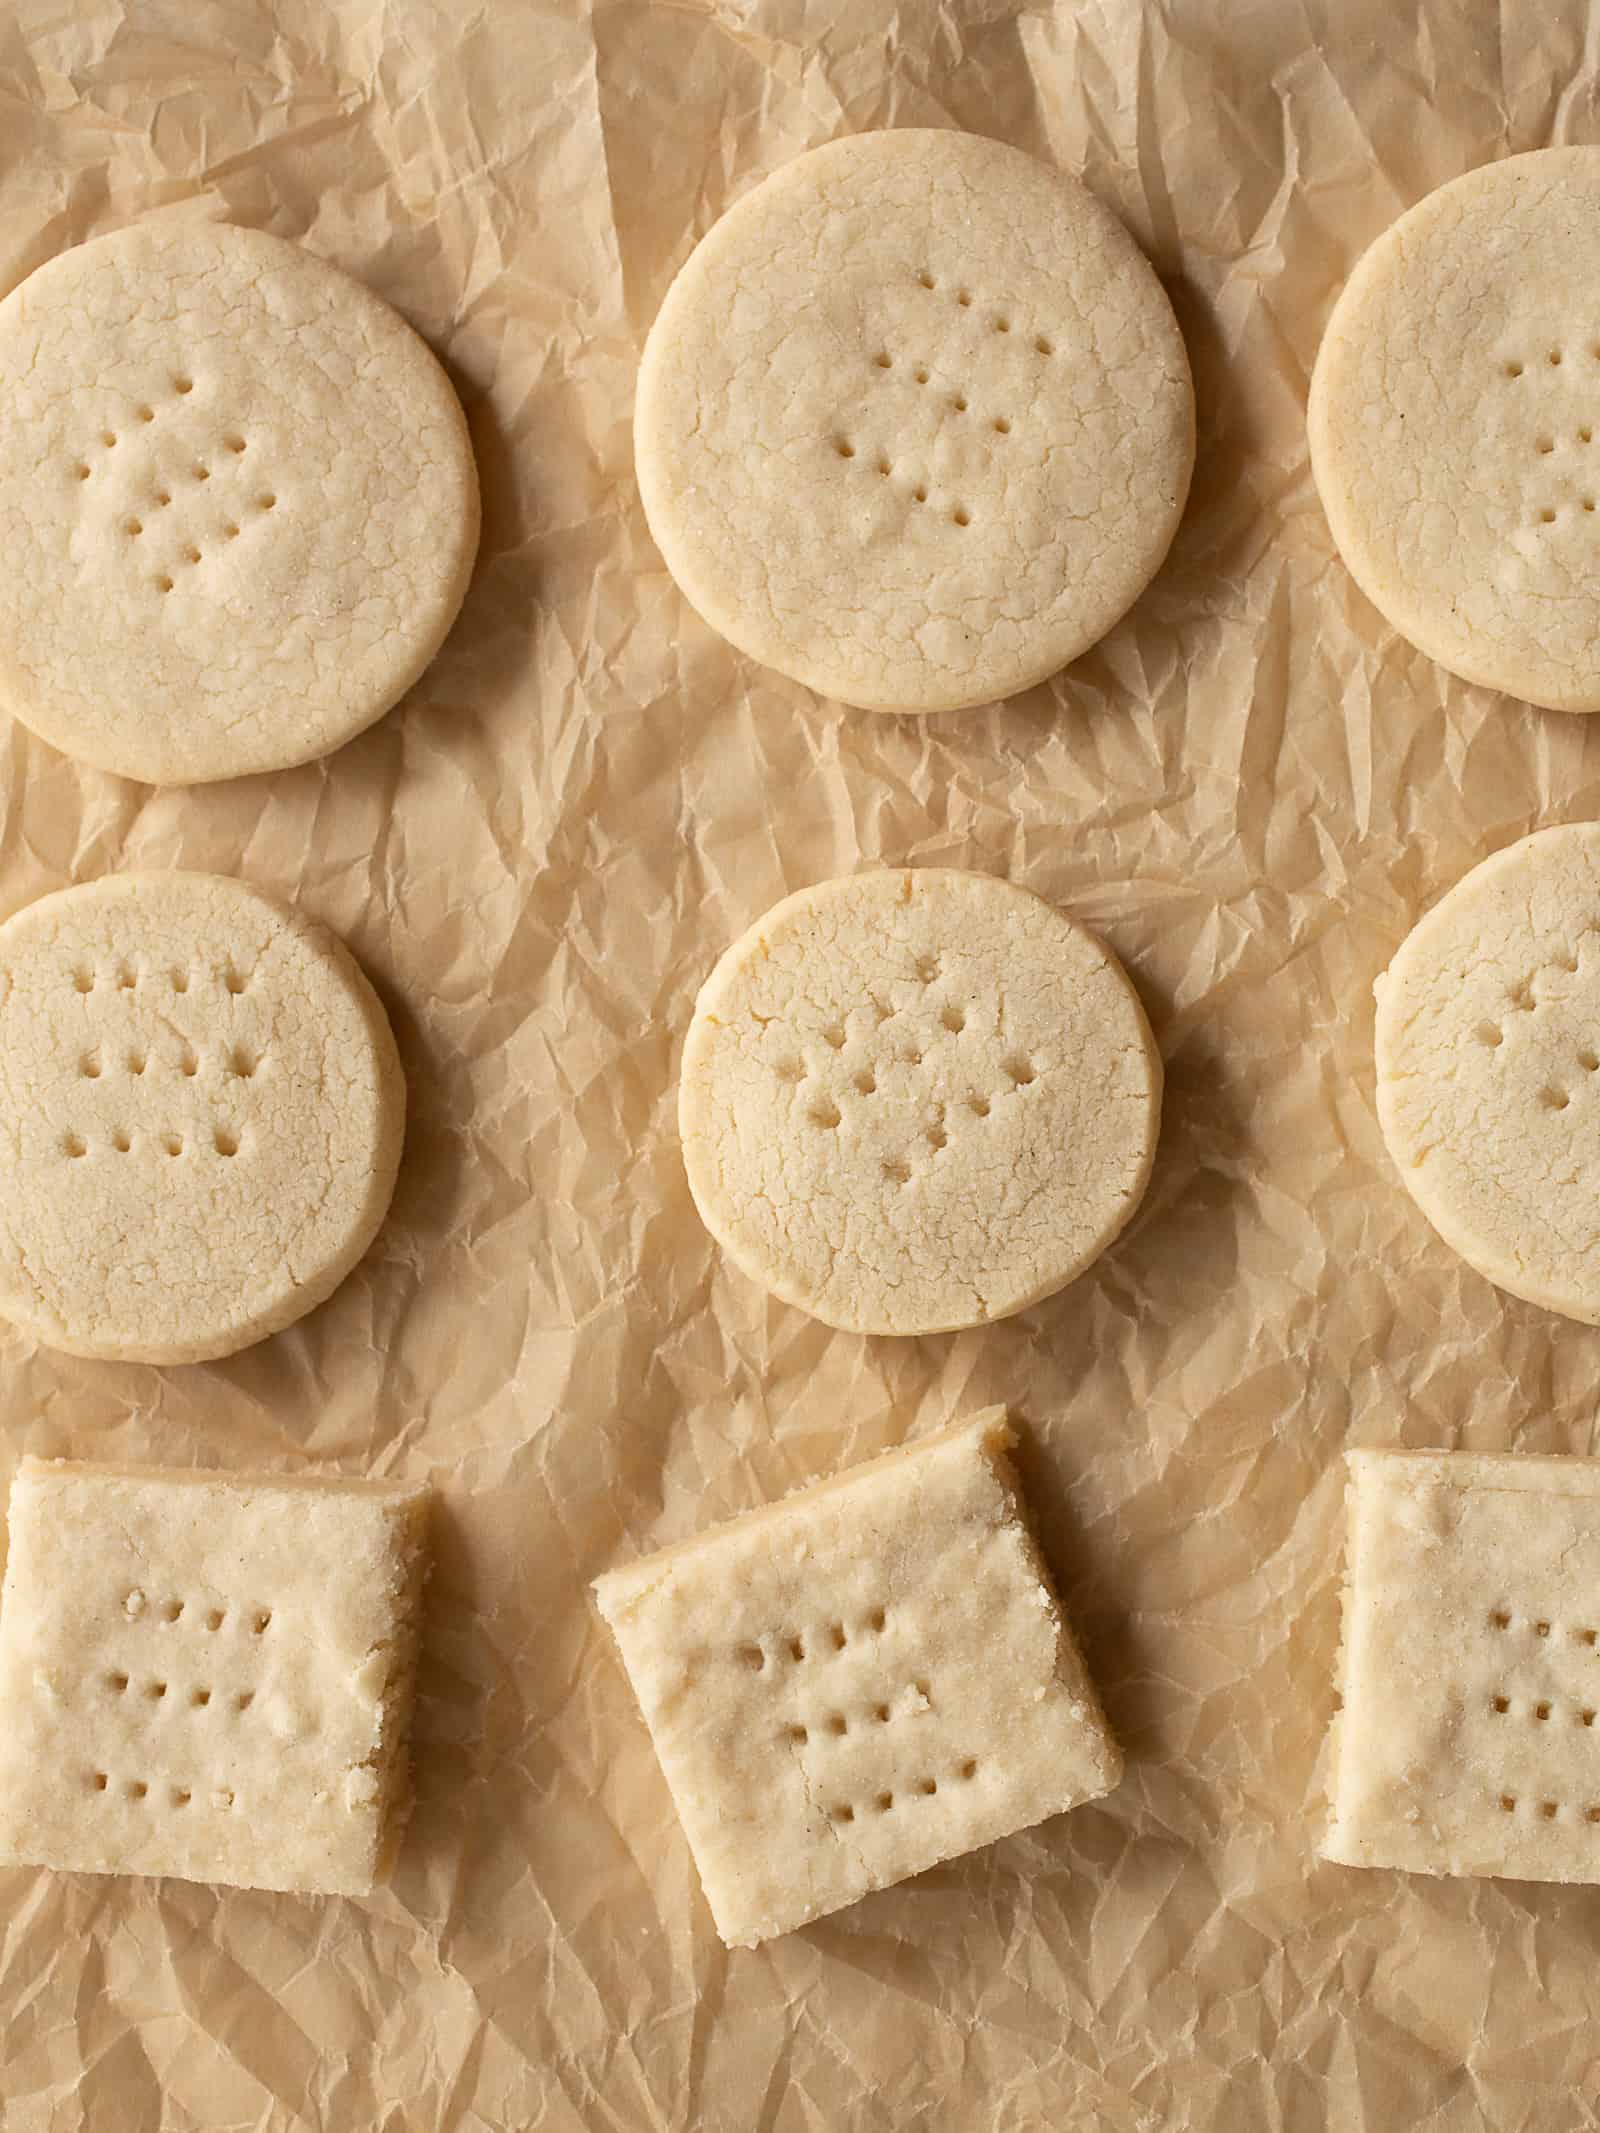 Gluten-free shortbread cookies on a brown, wrinkled piece of parchment paper. Two rows of round cookies and one row of square cookies.